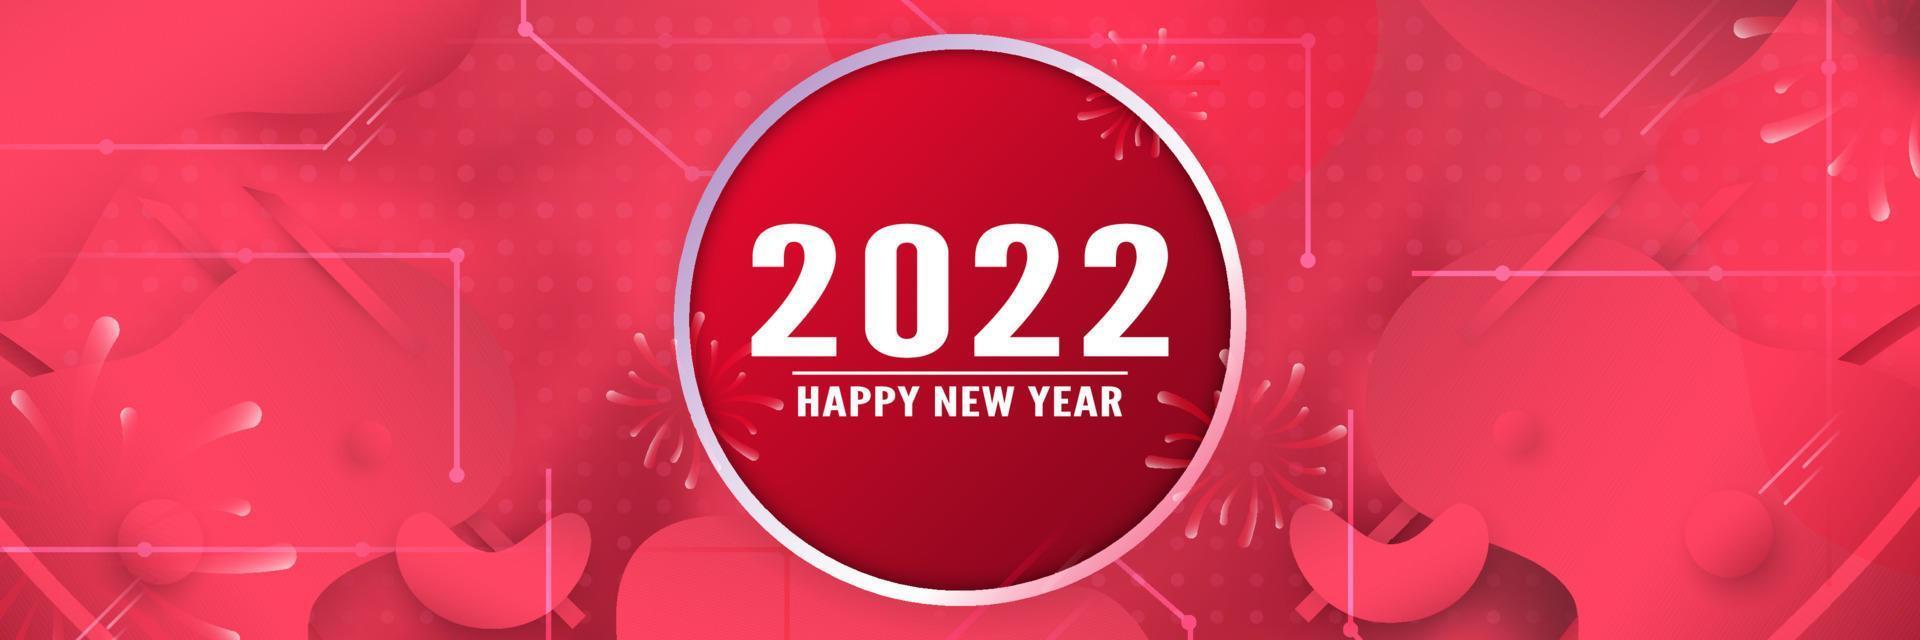 Vector illustration template for celebration of new year 2022. Modern abstract gradient background in liquid and fluid style. Trend design of the world.